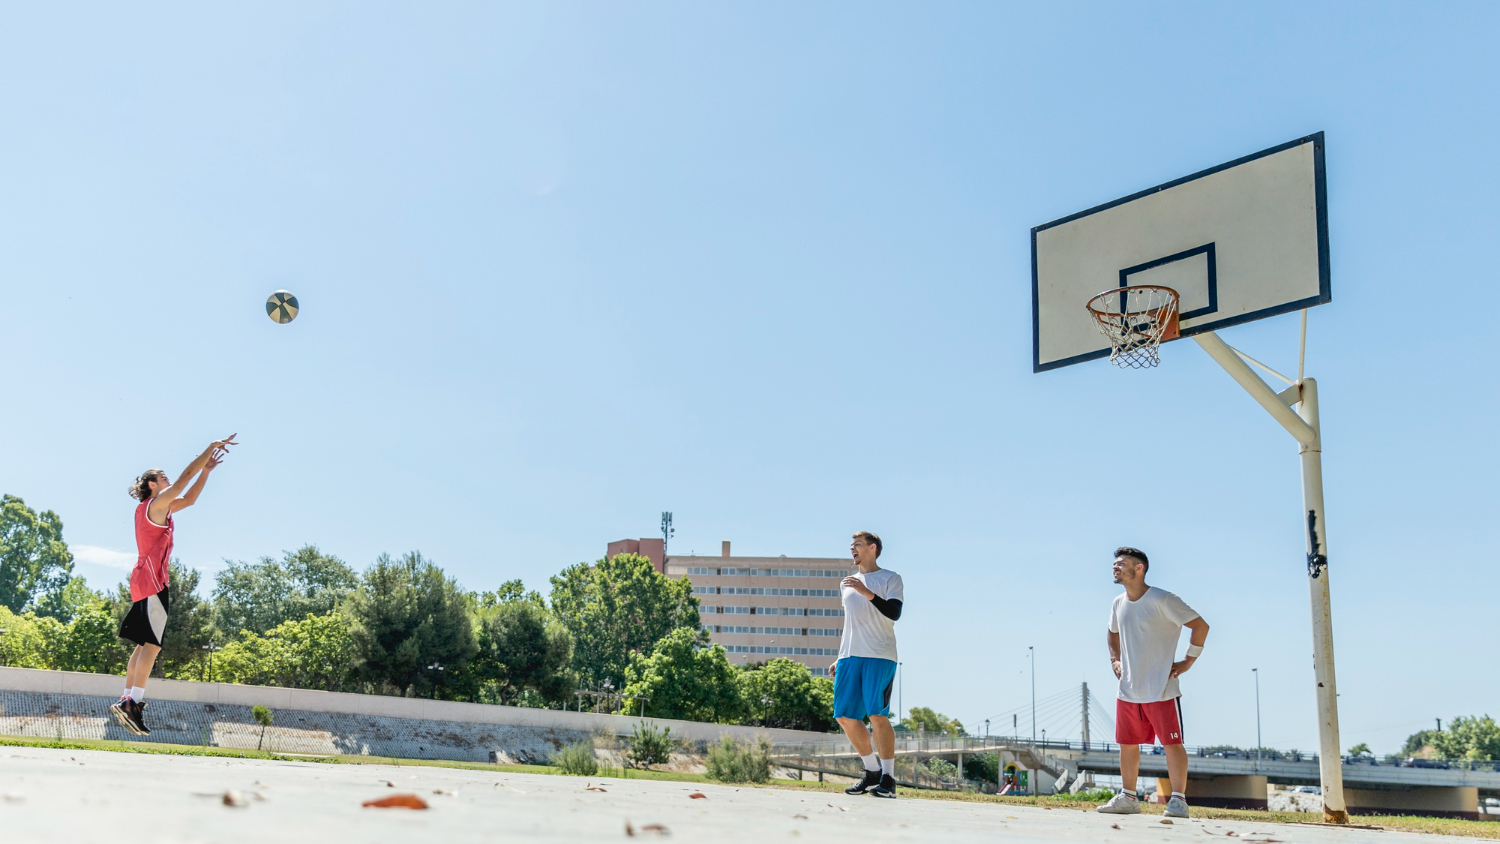 Top Tips for Summer Sports Safety on Your Backyard Court